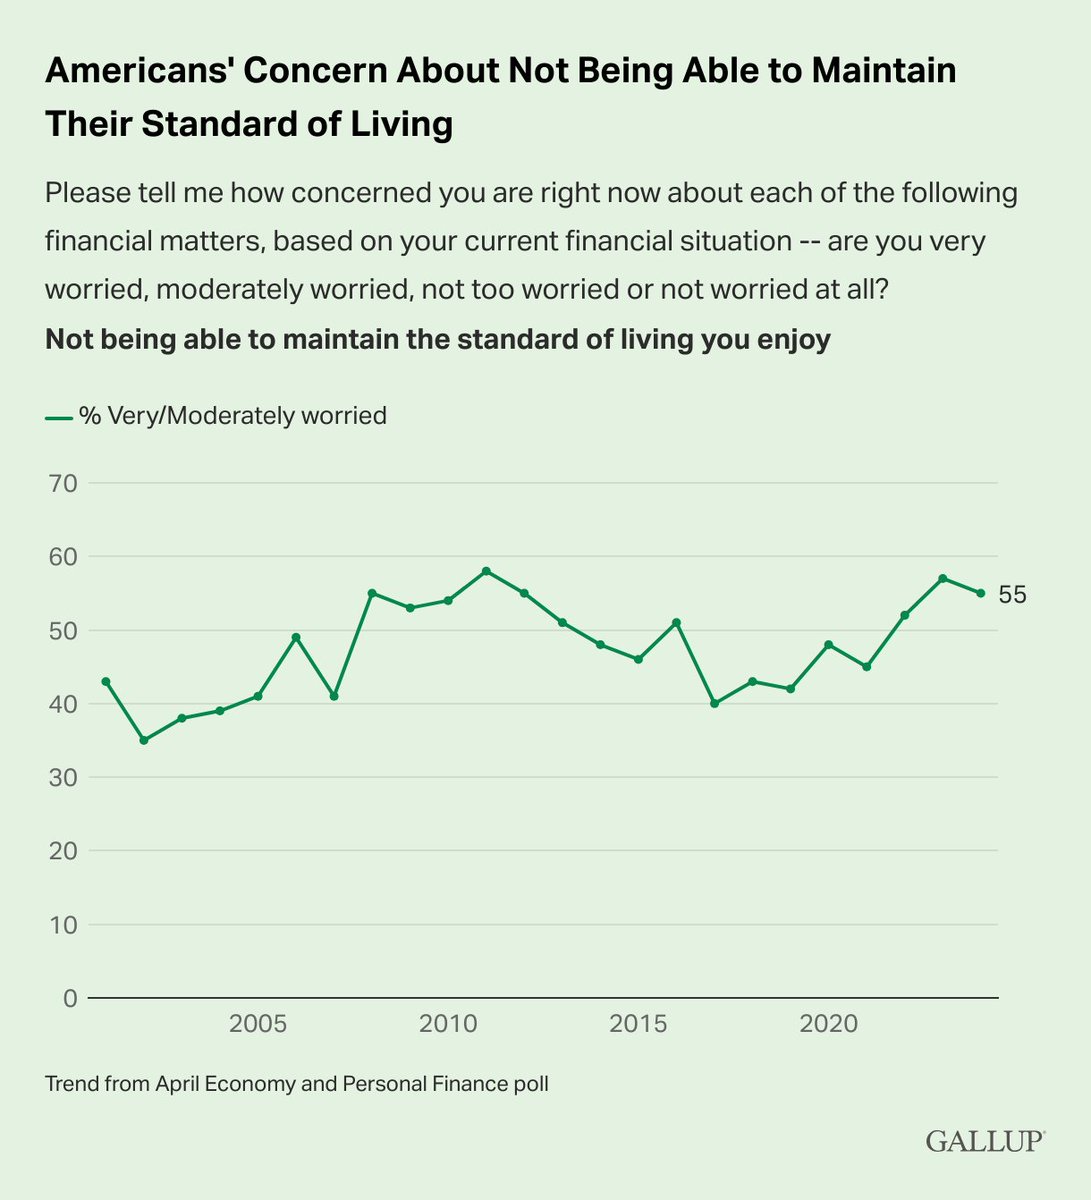 55% percent of Americans are very or moderately worried about maintaining their living standards, the third straight year a majority has done so. New data: on.gallup.com/44uj92U